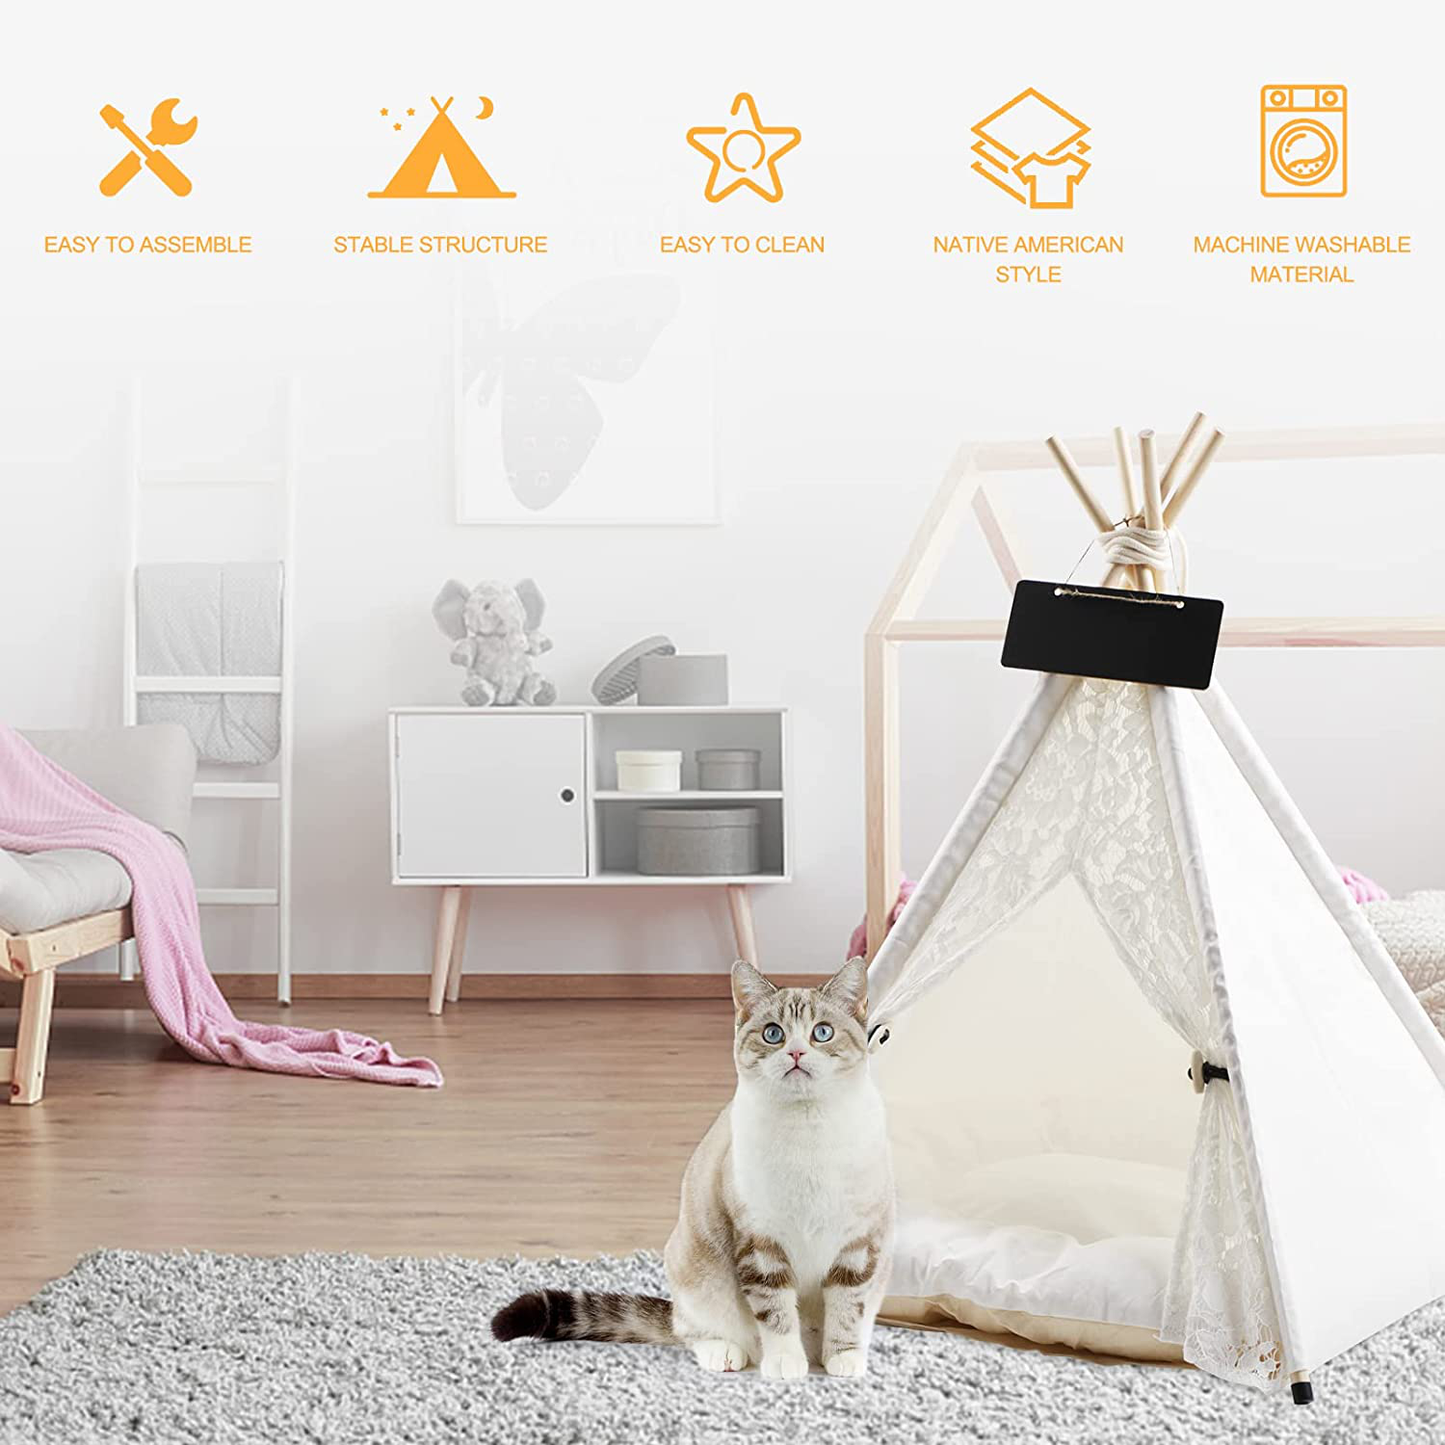 DEWEL Pet Teepee with Cushion Dog & Cat Tent with Soft Bed Portable Pet House for Small Medium Dogs and Cats, 27.5 Inch Tall Foldable Pet Teepee Tent for Puppy and Rabbit Indoor